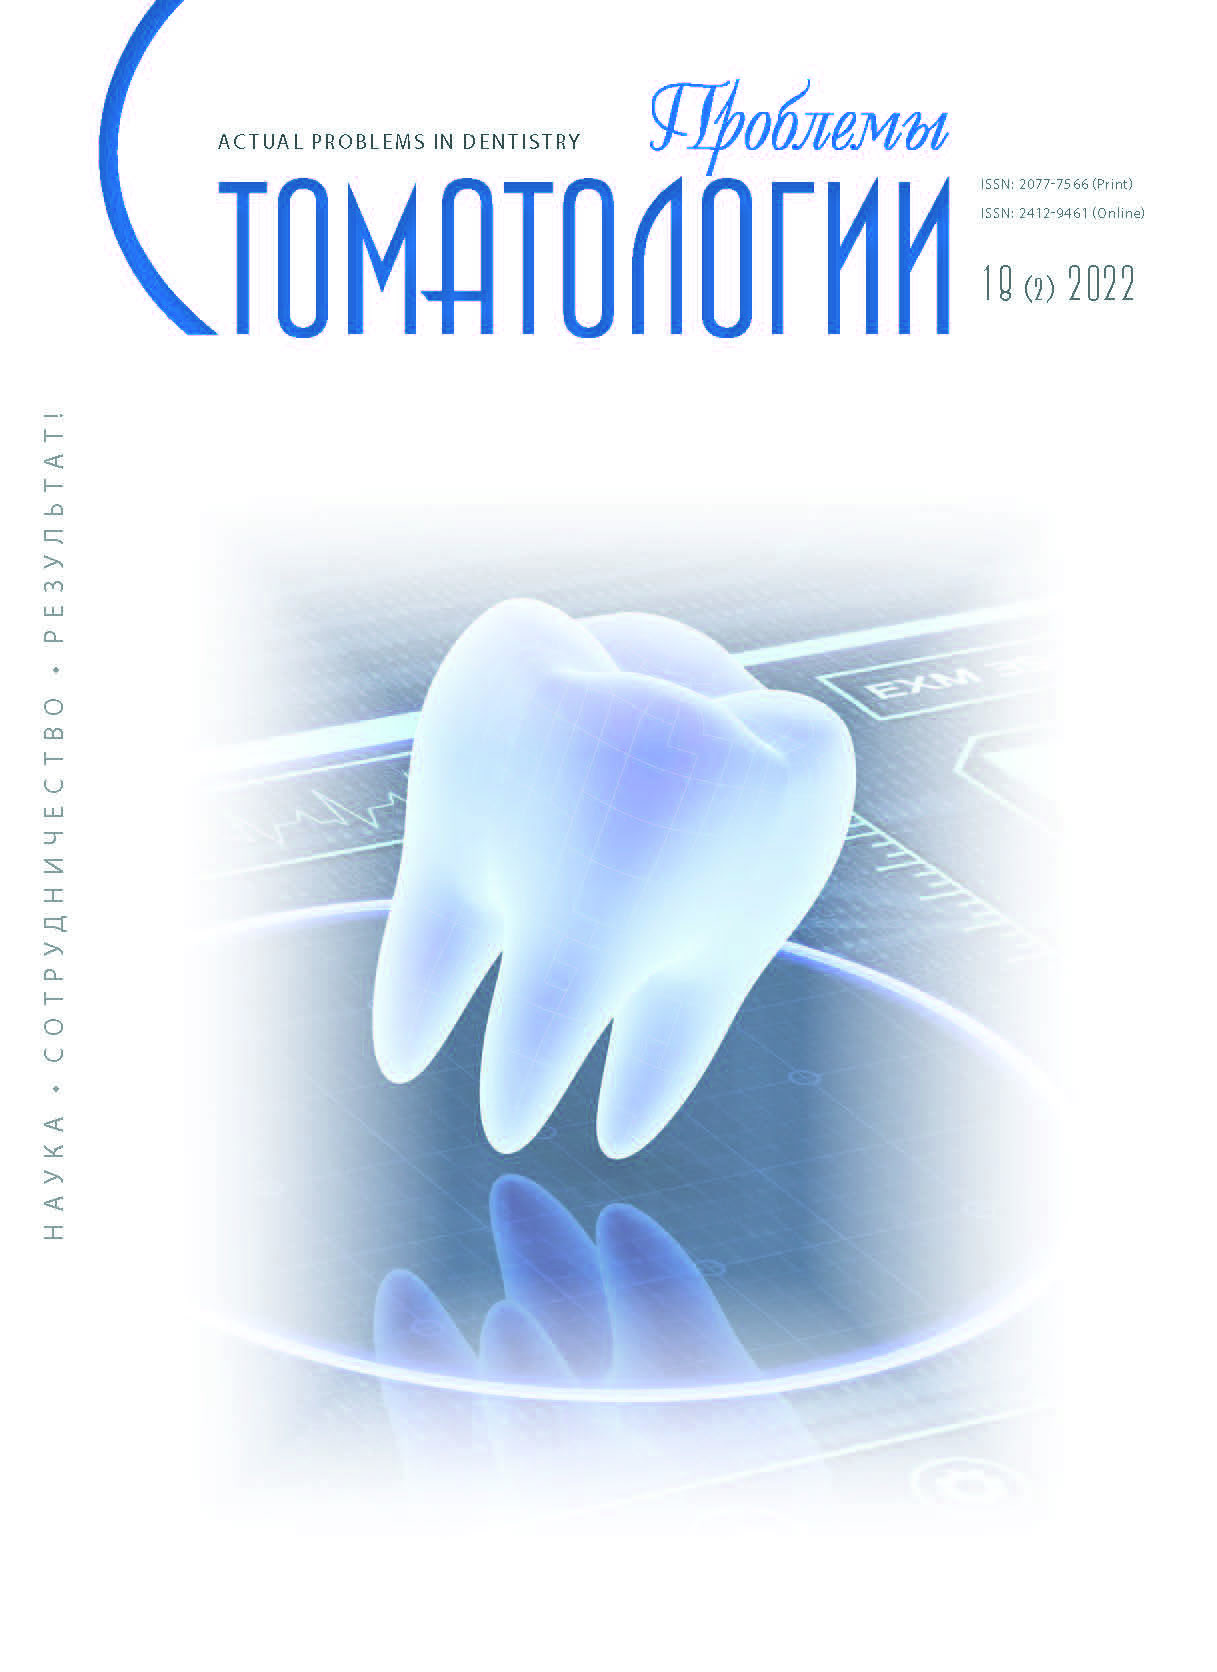                         IMPROVING THE MEANS AND METHODS OF PROFESSIONAL ORAL HYGIENE IN ELDERLY PATIENTS DURING AND AFTER IMPLANT PROSTHETICS
            